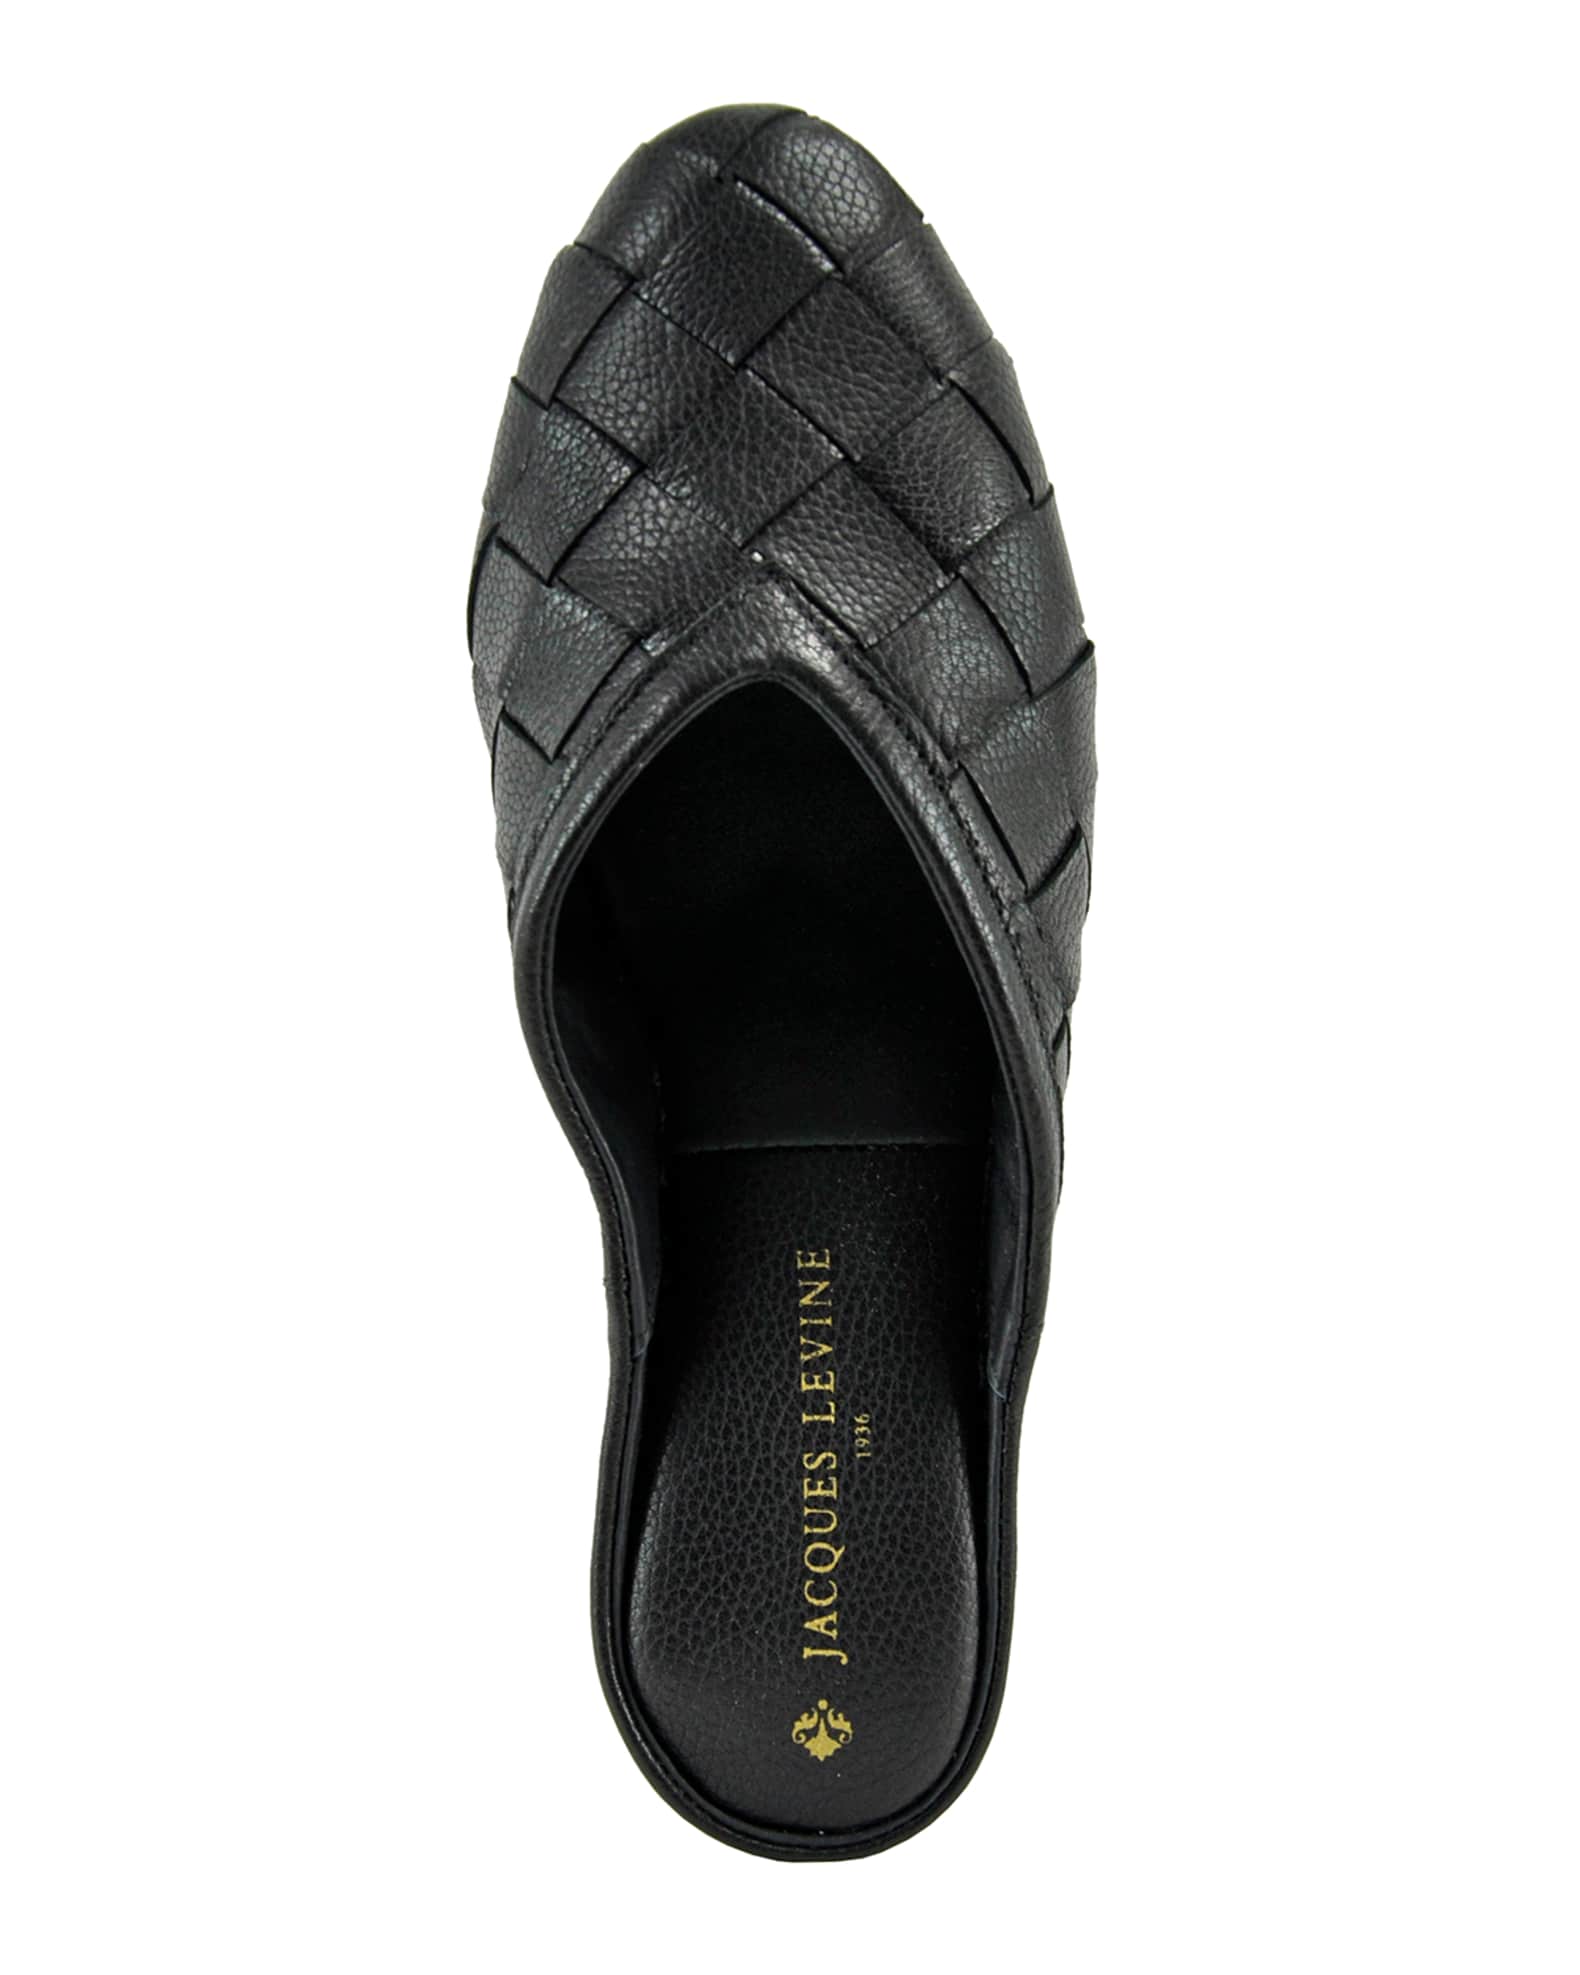 Jacques Levine Woven Leather Slipper